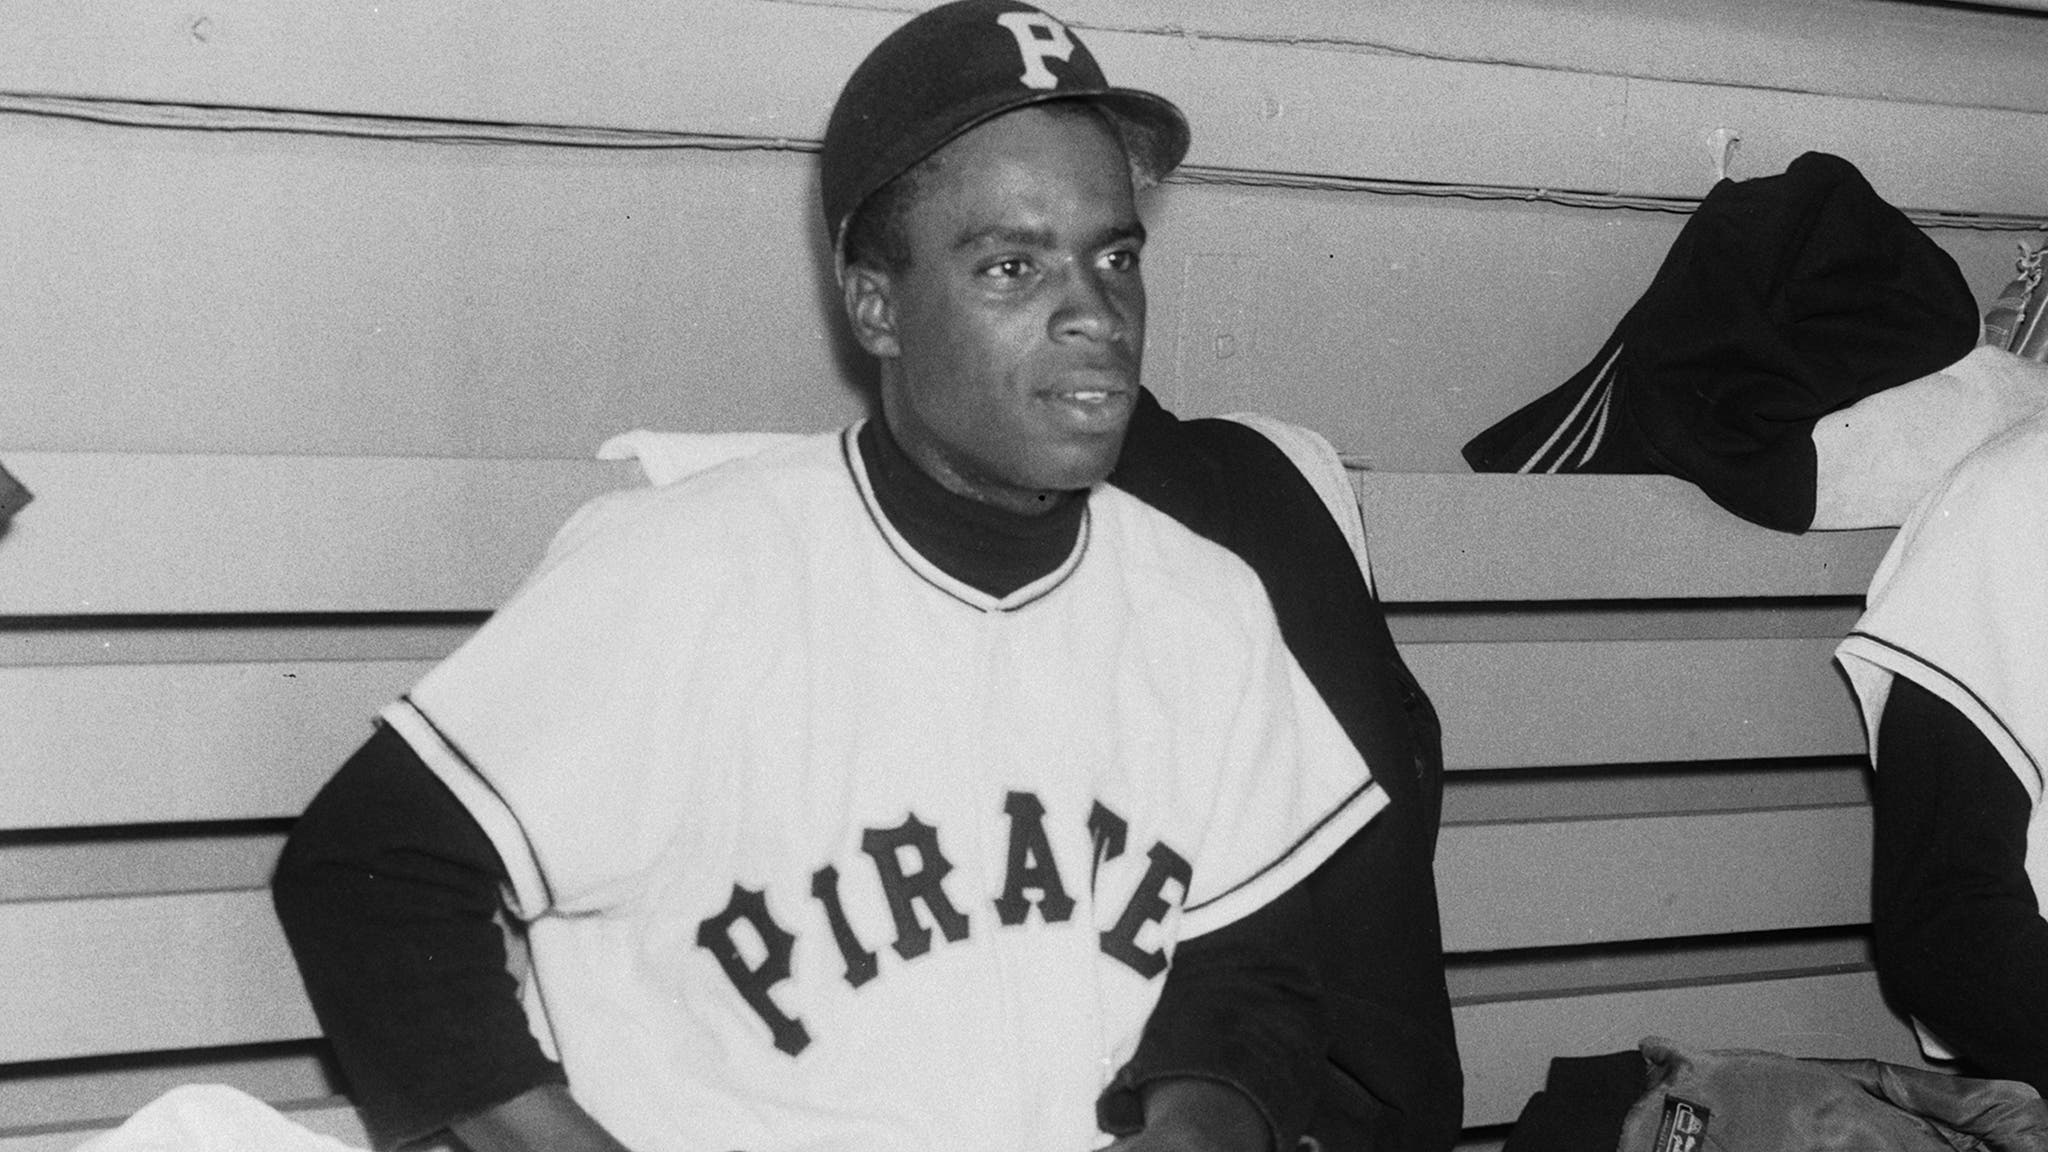 Curt Roberts became the first African American on the Pittsburgh Pirates